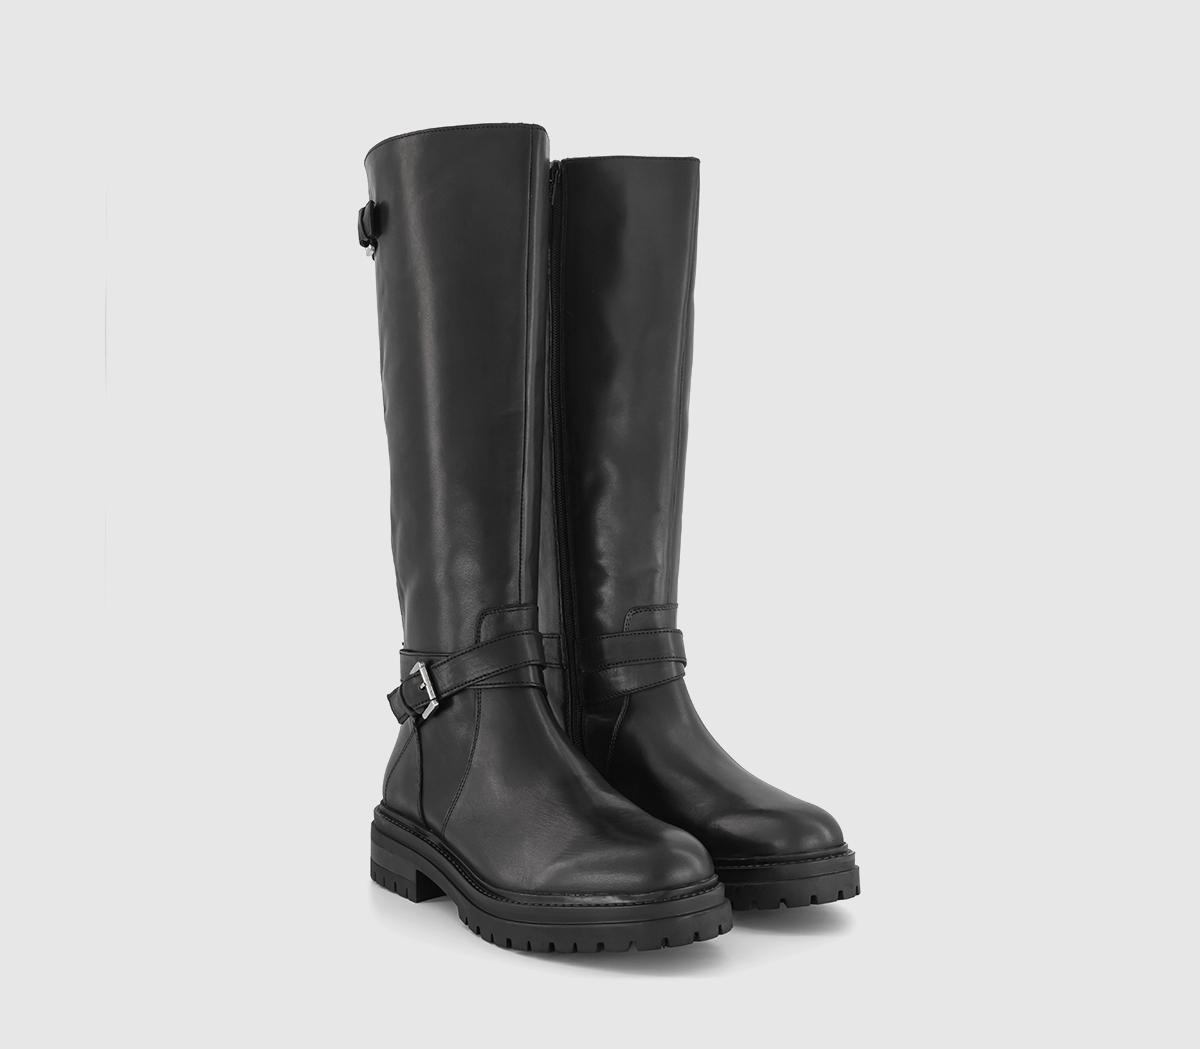 OFFICE Womens Krissy Buckle Strap Knee High Rider Boots Black Leather, 5